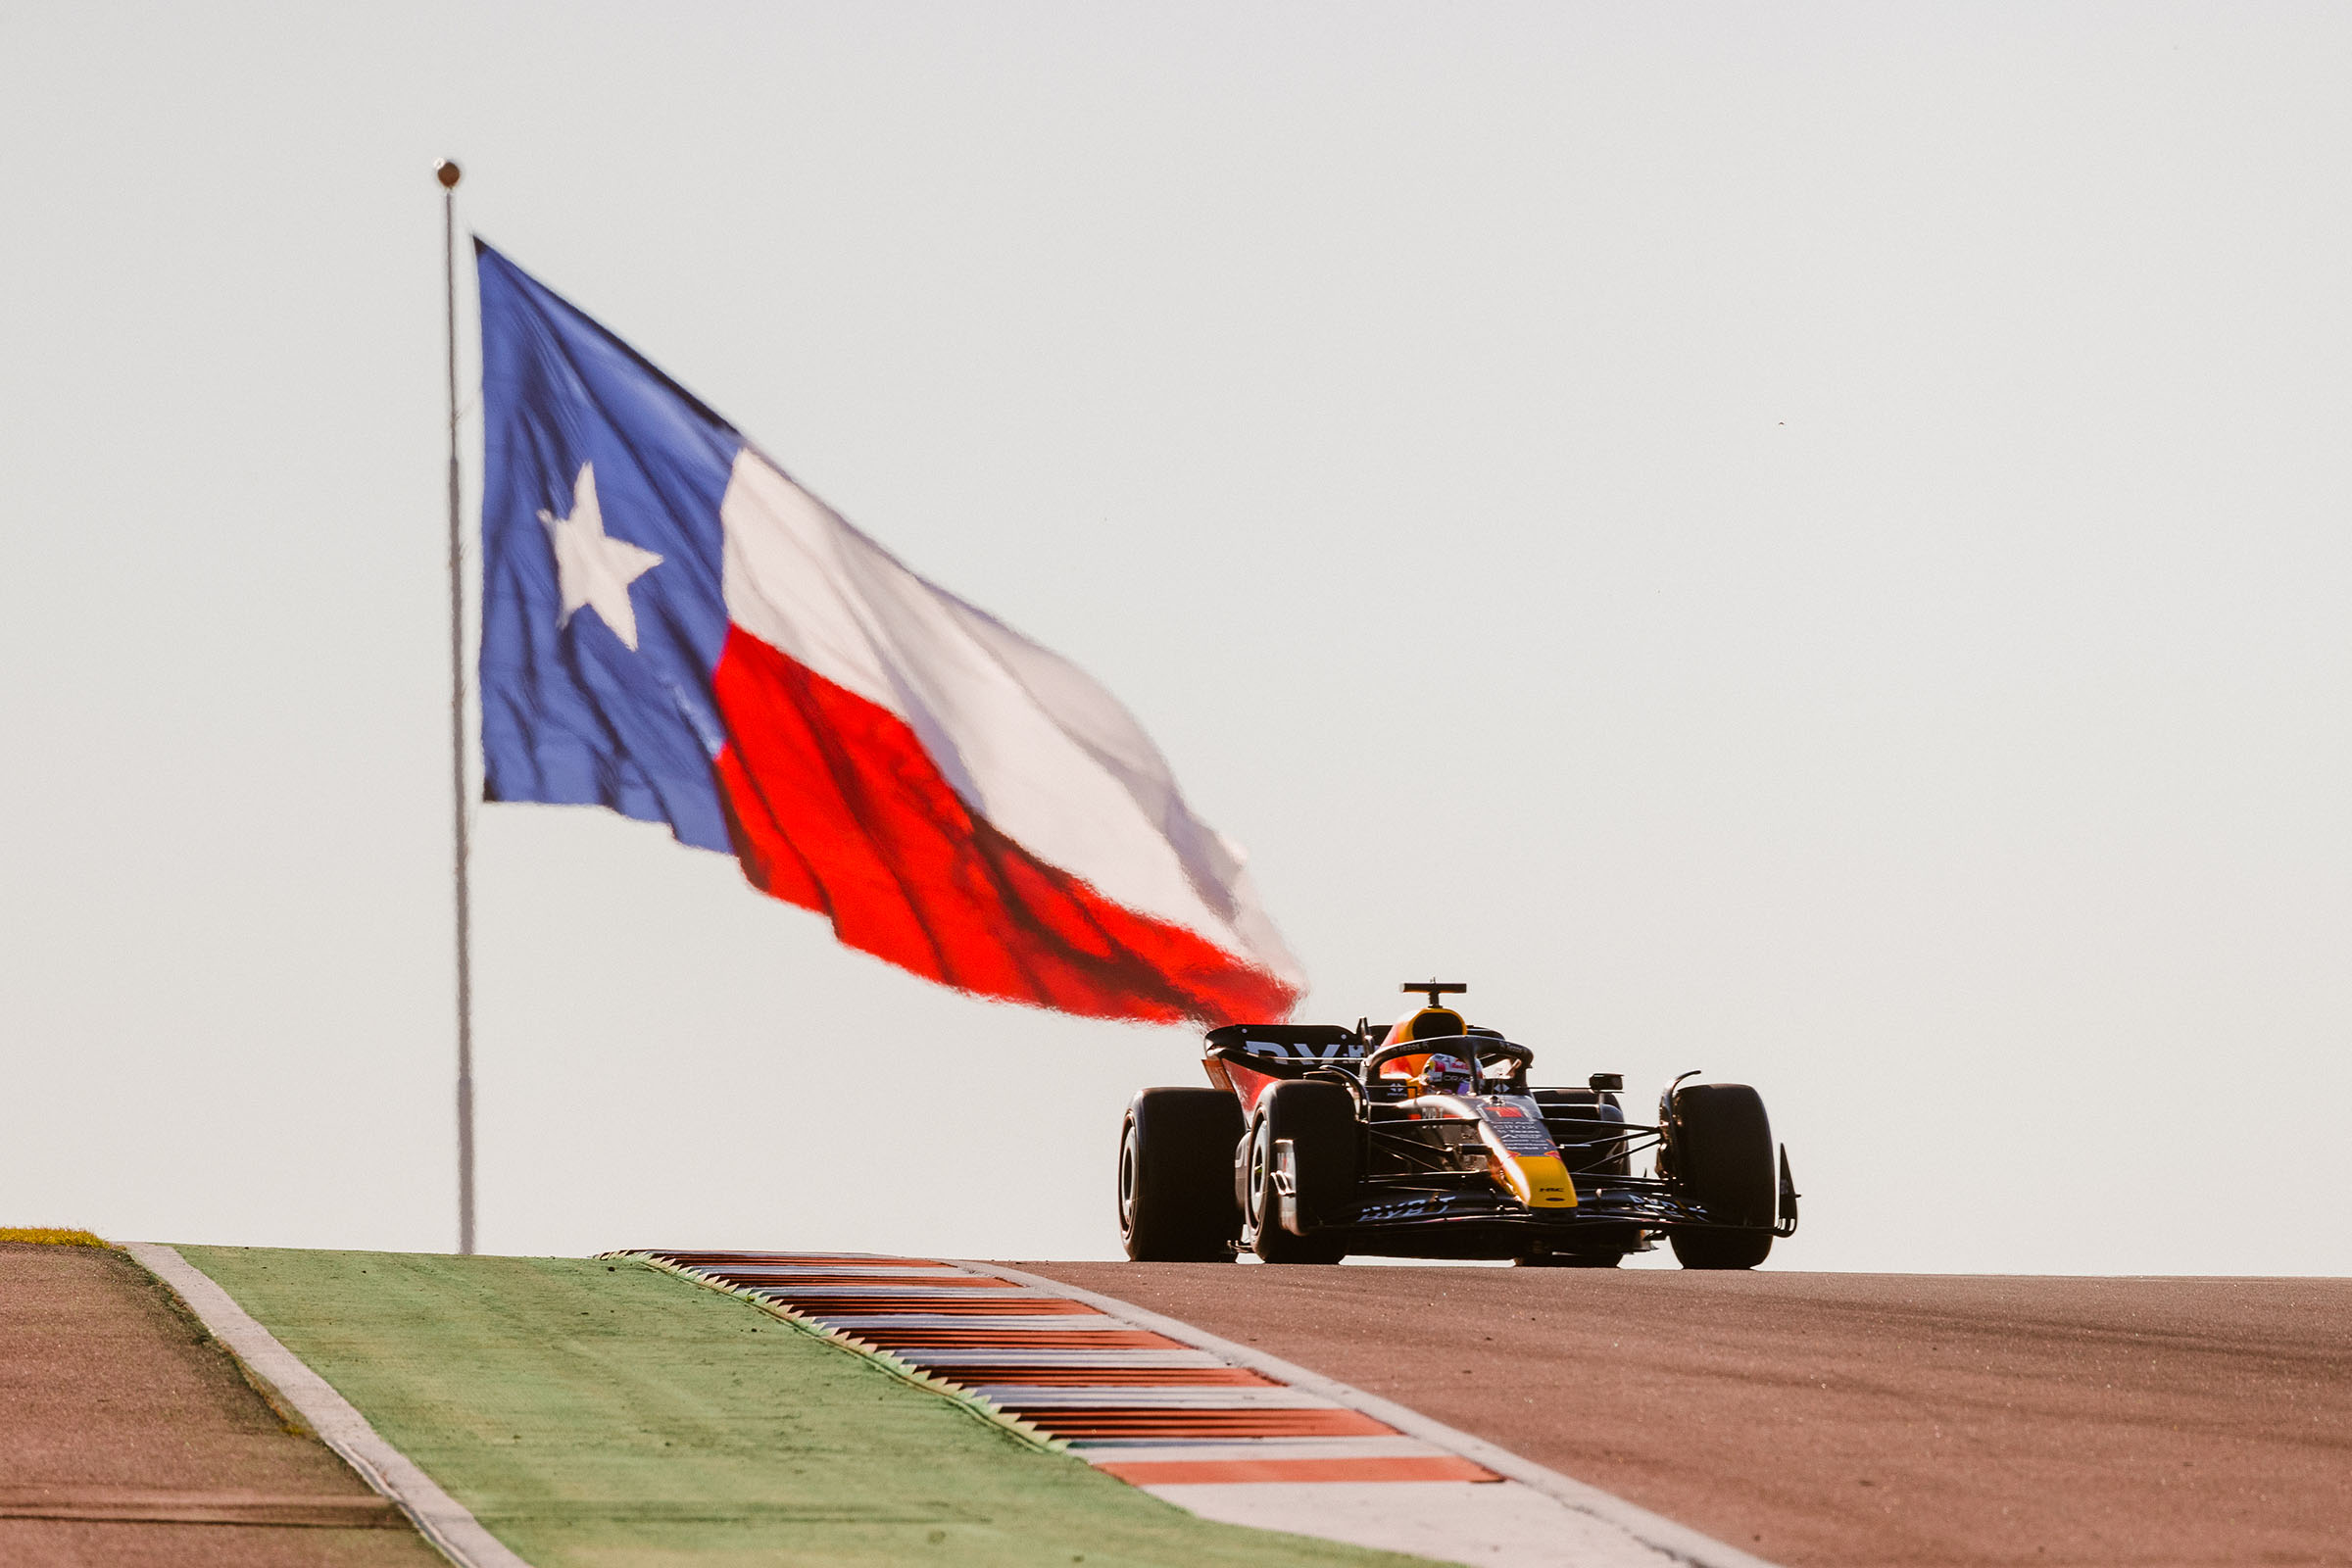 A Formula 1 car speeds down a track in front of a large Texas flag in the background